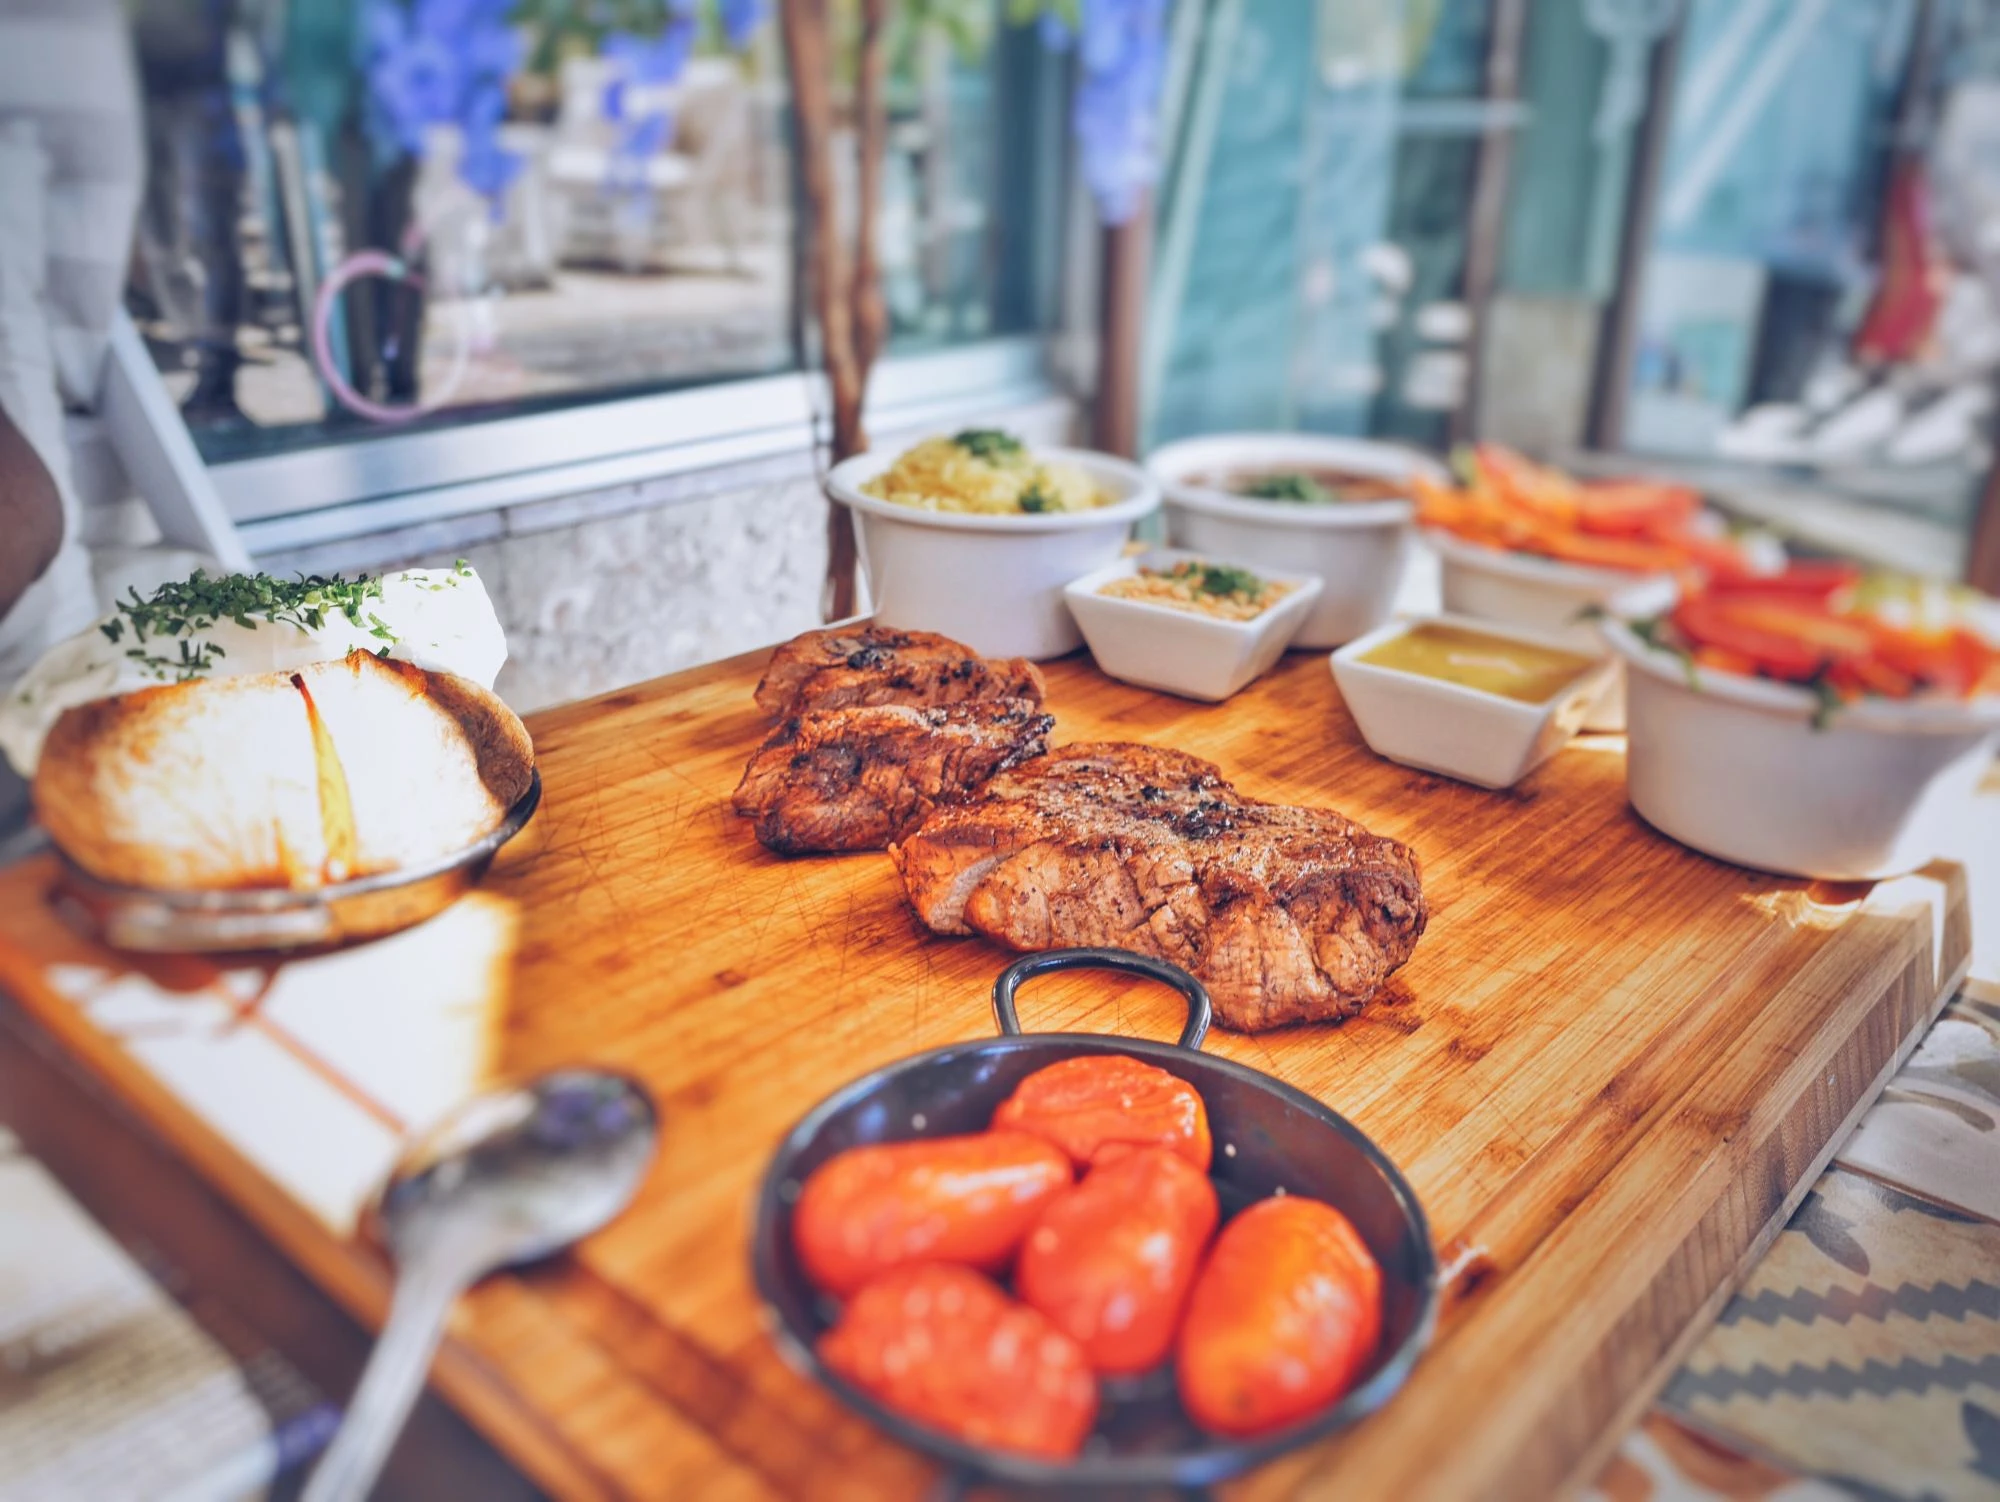 A tray with steak, bread and accessories. 